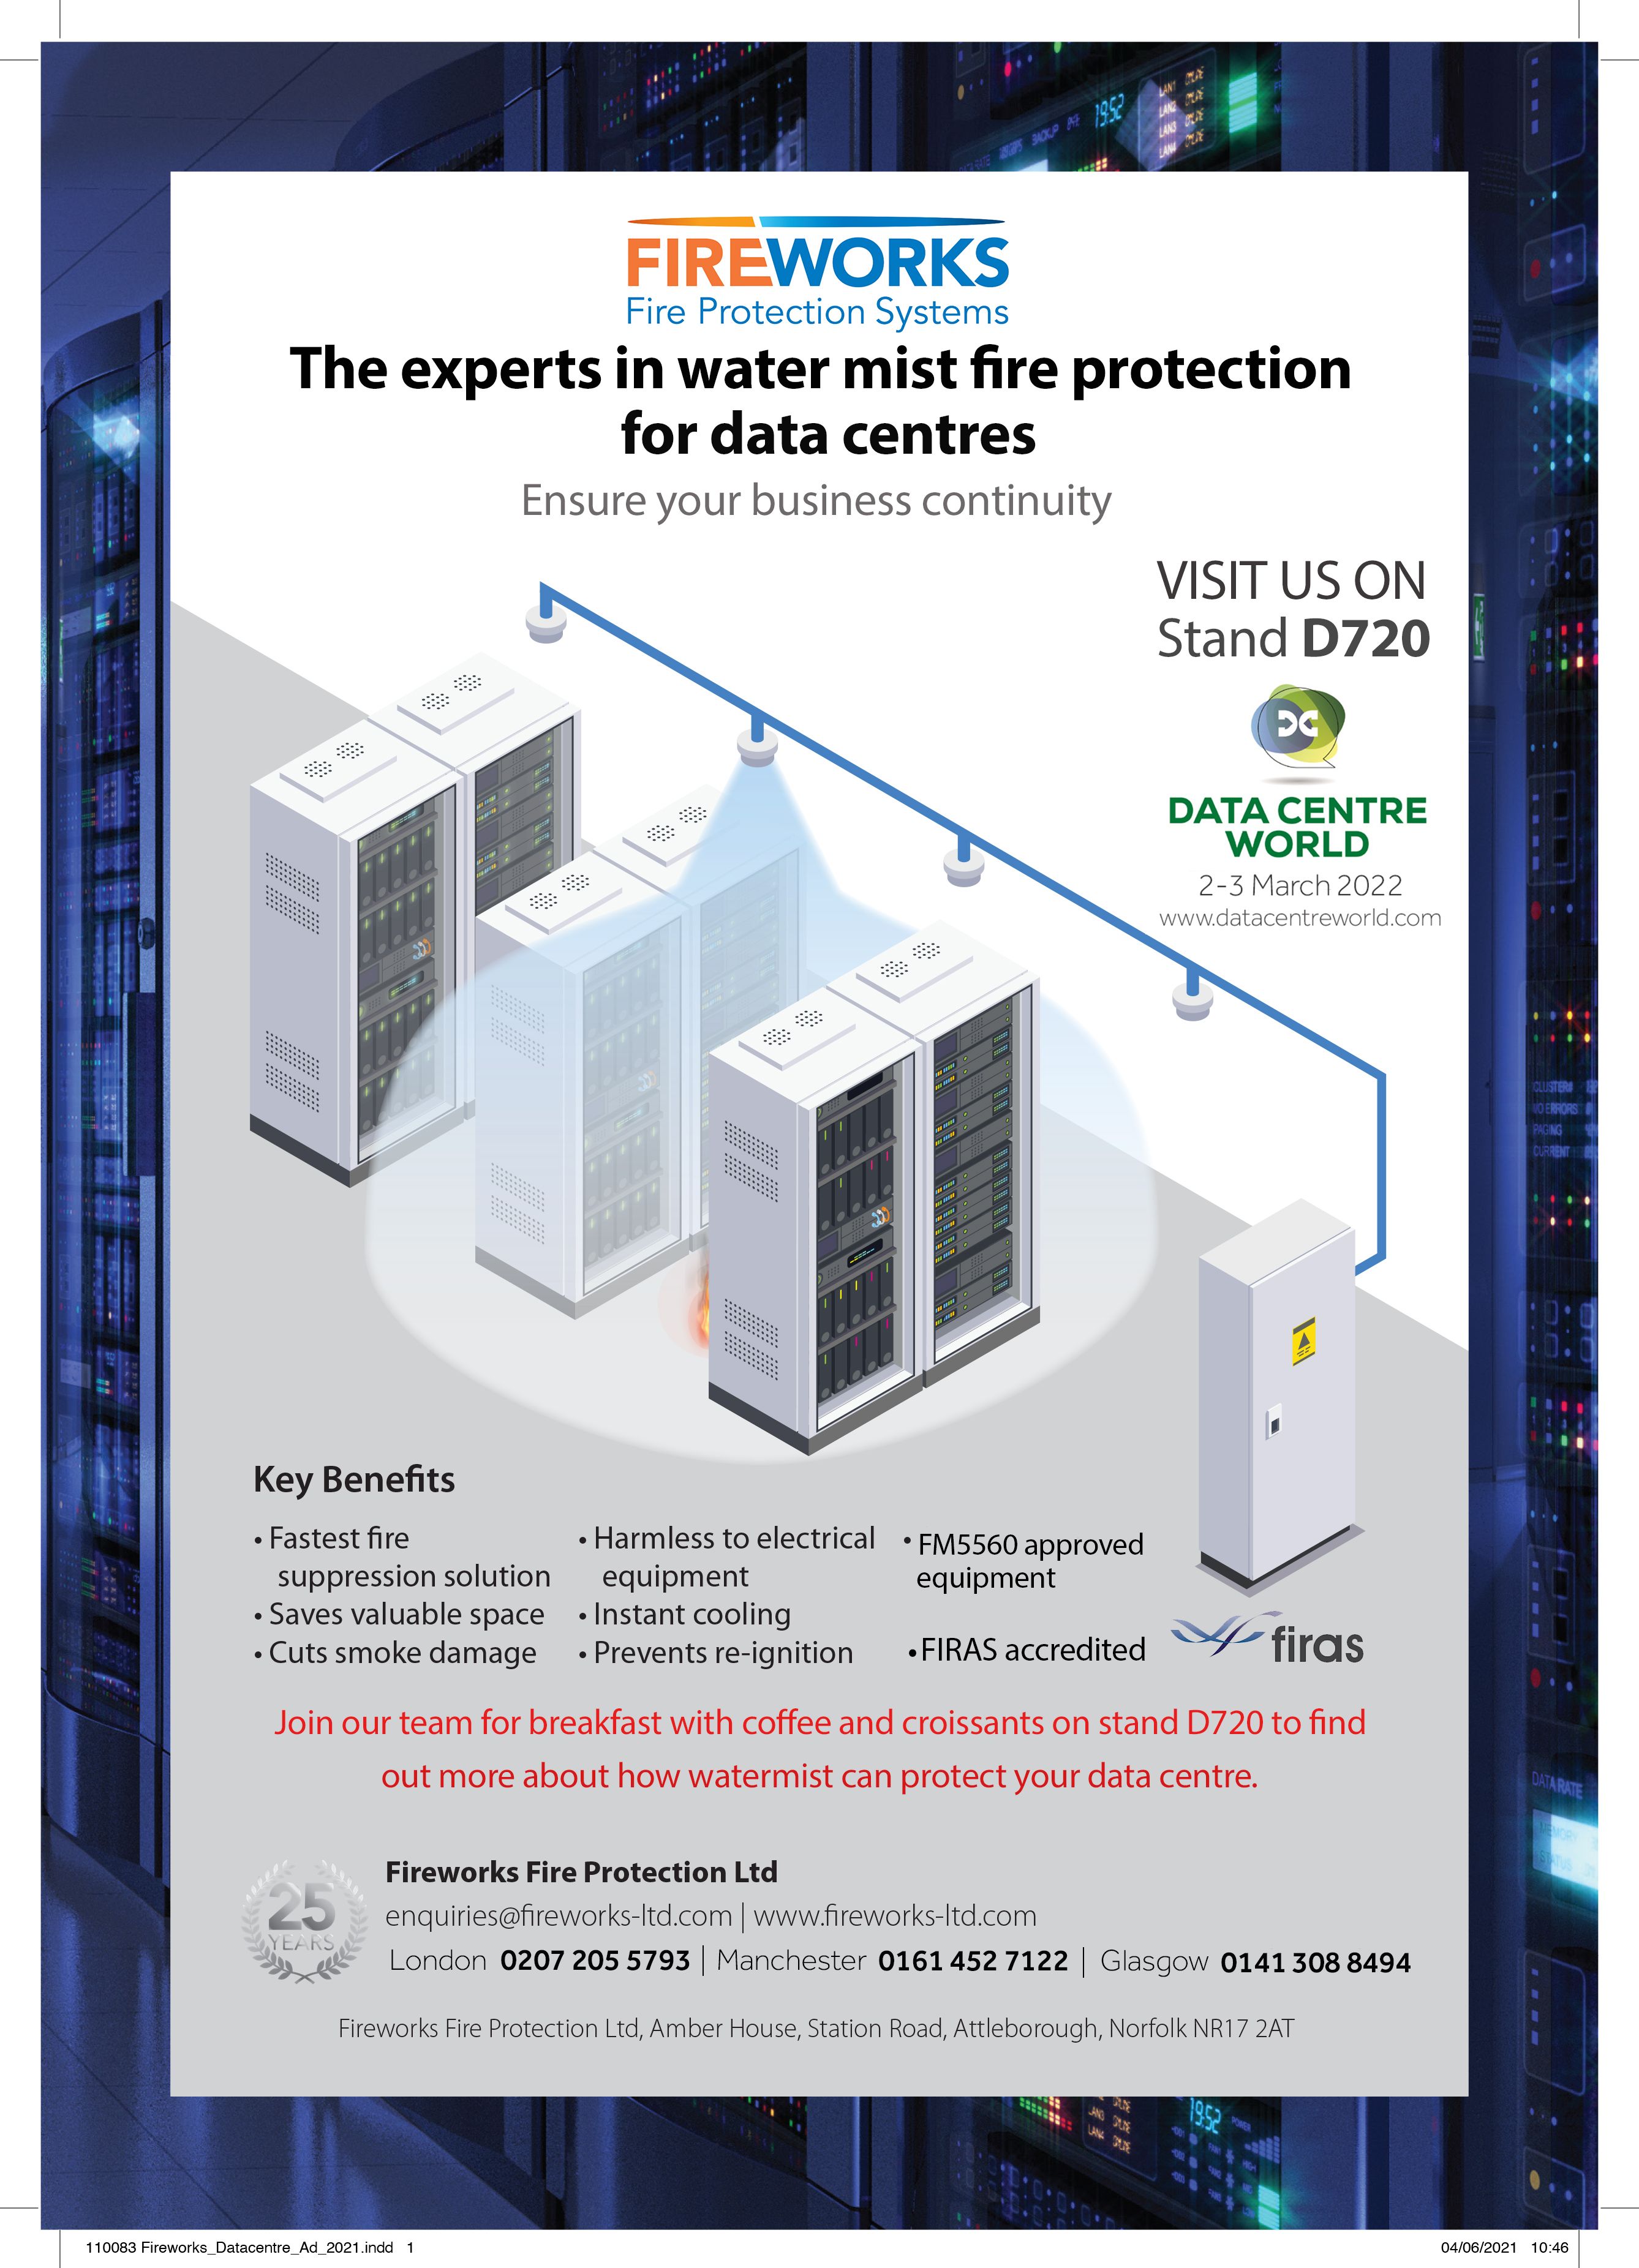 5 Good reasons for protecting your Data Centre with Water Mist